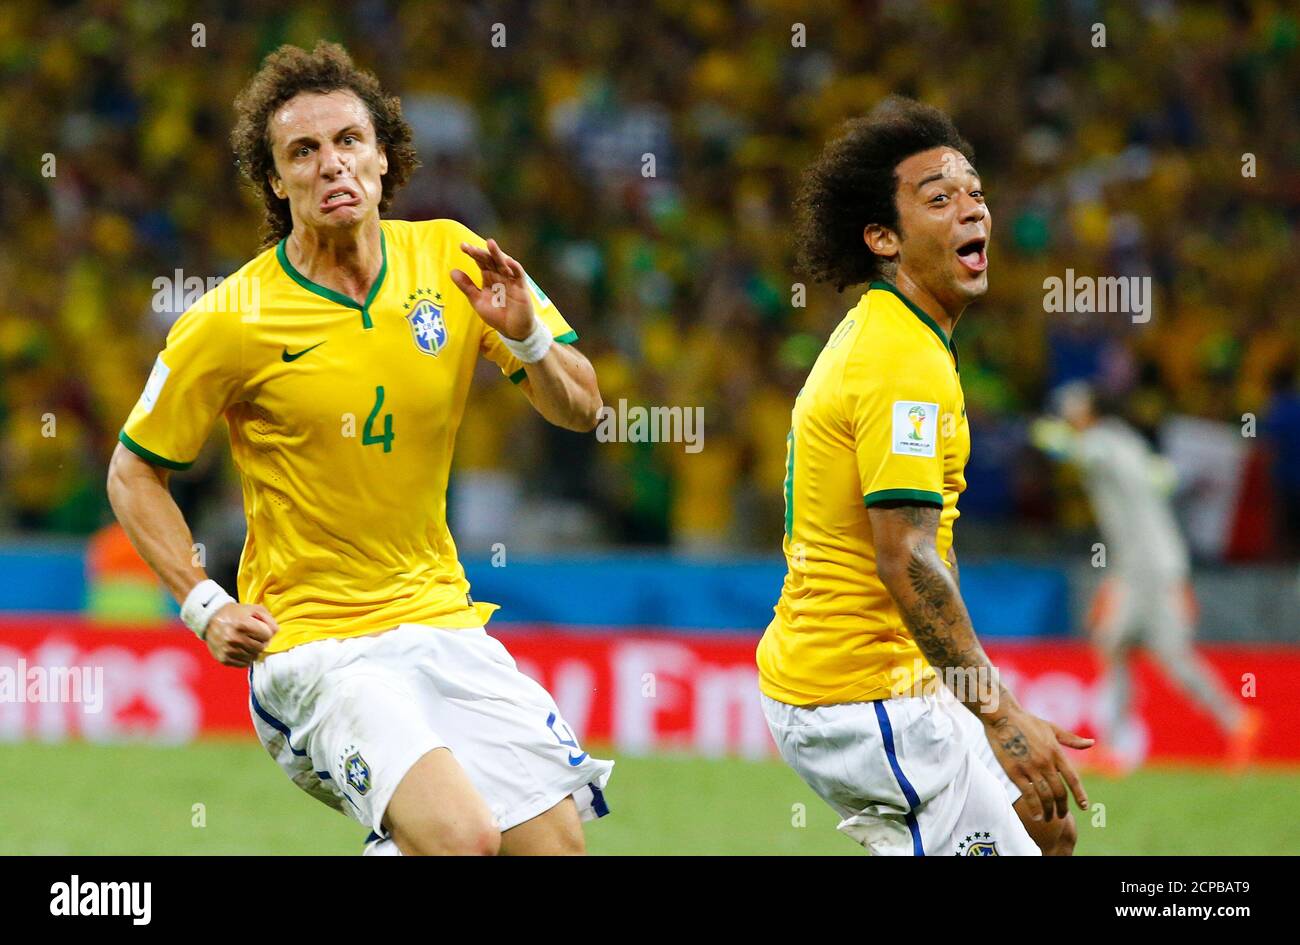 Brazil's David Luiz celebrates after scoring a goal against Colombia next to teammate Marcelo during their 2014 World Cup quarter-finals at the Castelao arena in Fortaleza July 4, 2014.  REUTERS/Stefano Rellandini (BRAZIL  - Tags: SOCCER SPORT WORLD CUP) Stock Photo